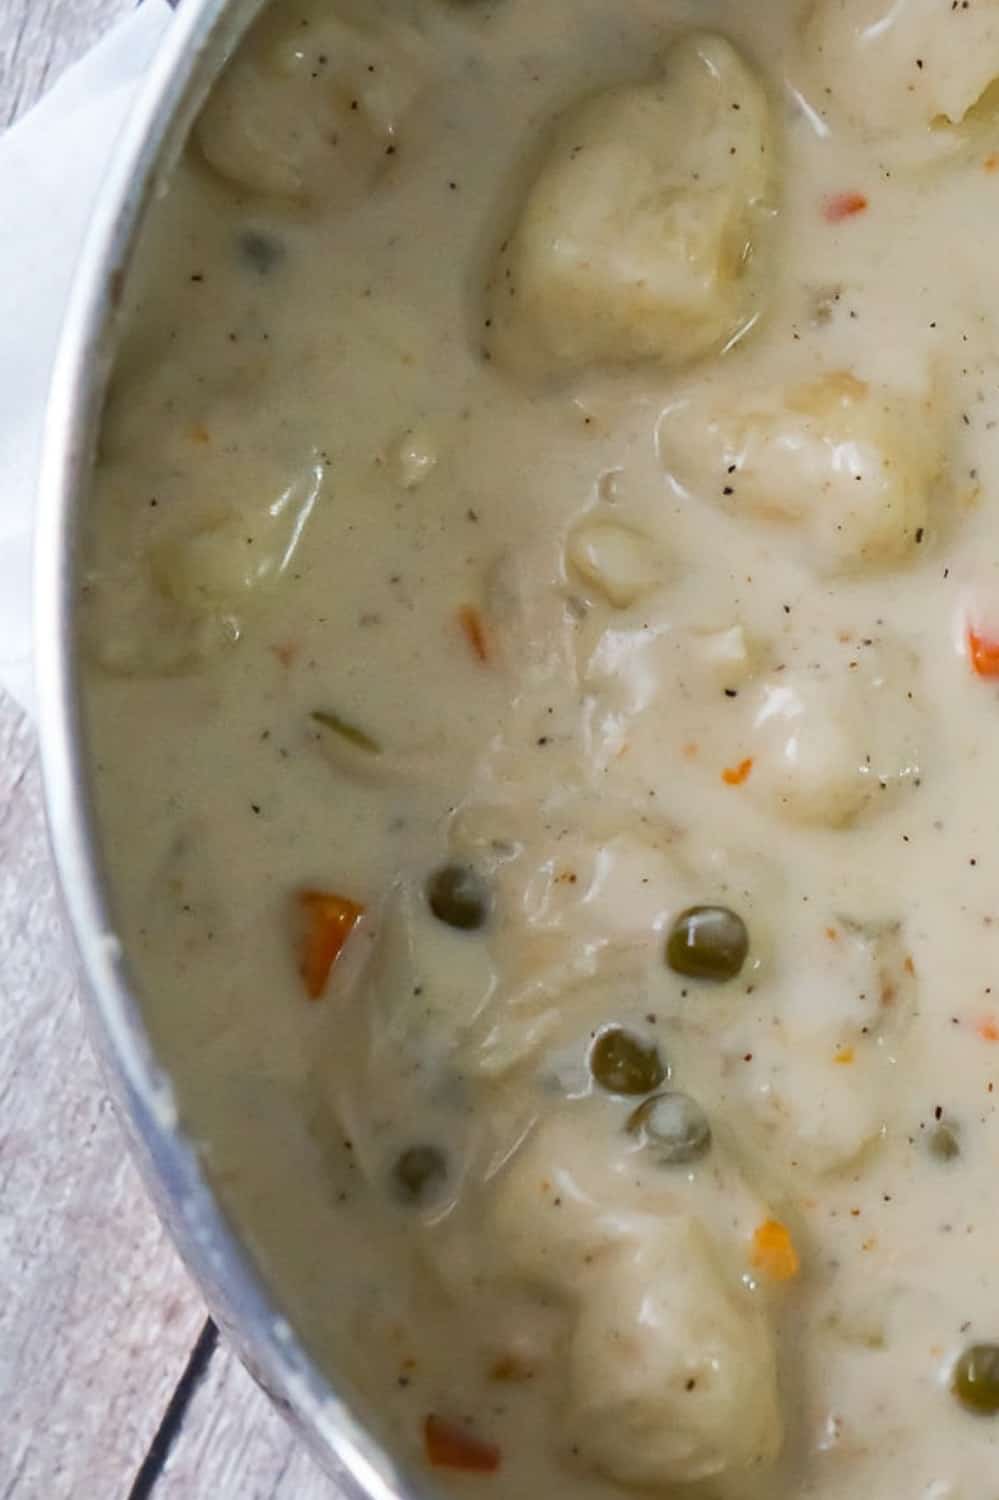 Easy Chicken and Dumplings with Biscuits is a simple weeknight dinner recipe using rotisserie chicken and Pillsbury refrigerated biscuits. These creamy chicken and dumplings are a hearty comfort food dish perfect for cold weather.